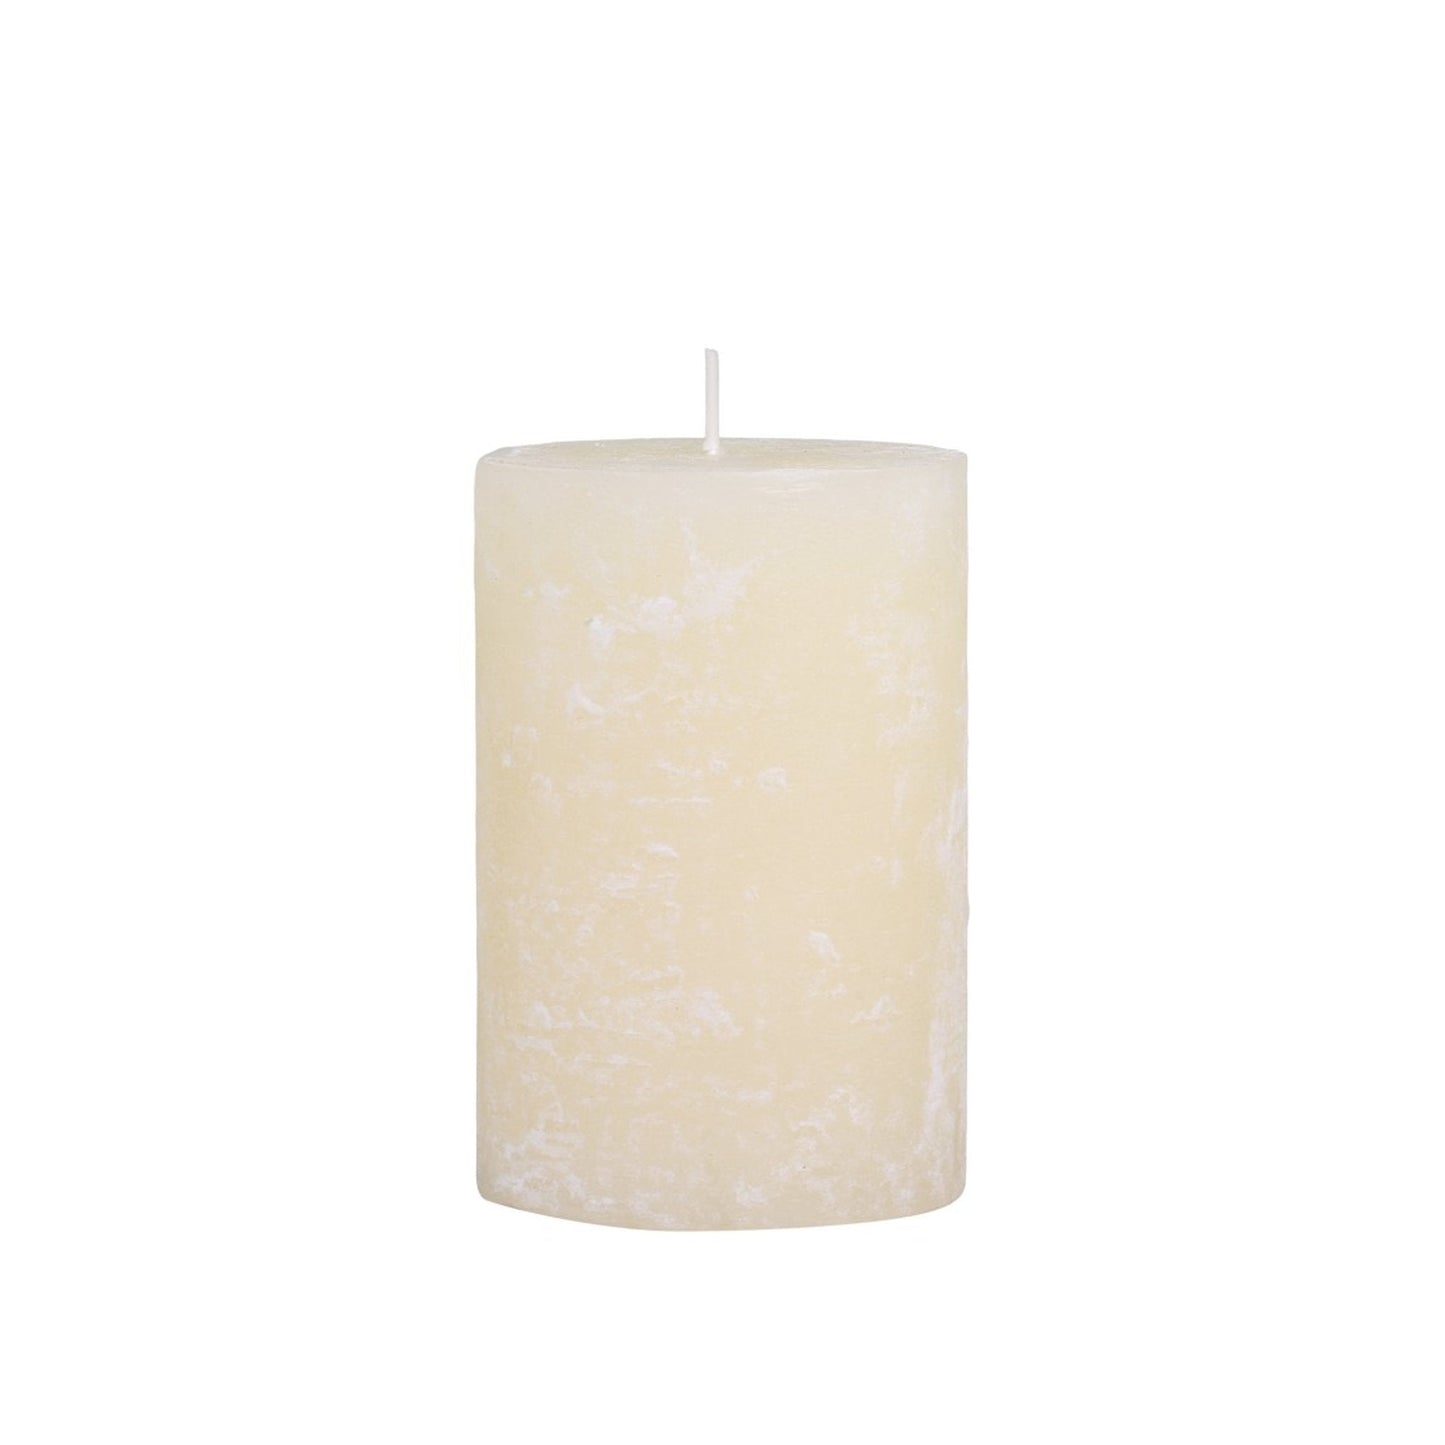 Cream Rustic Pillar Candle 90 hours - Bumble Living